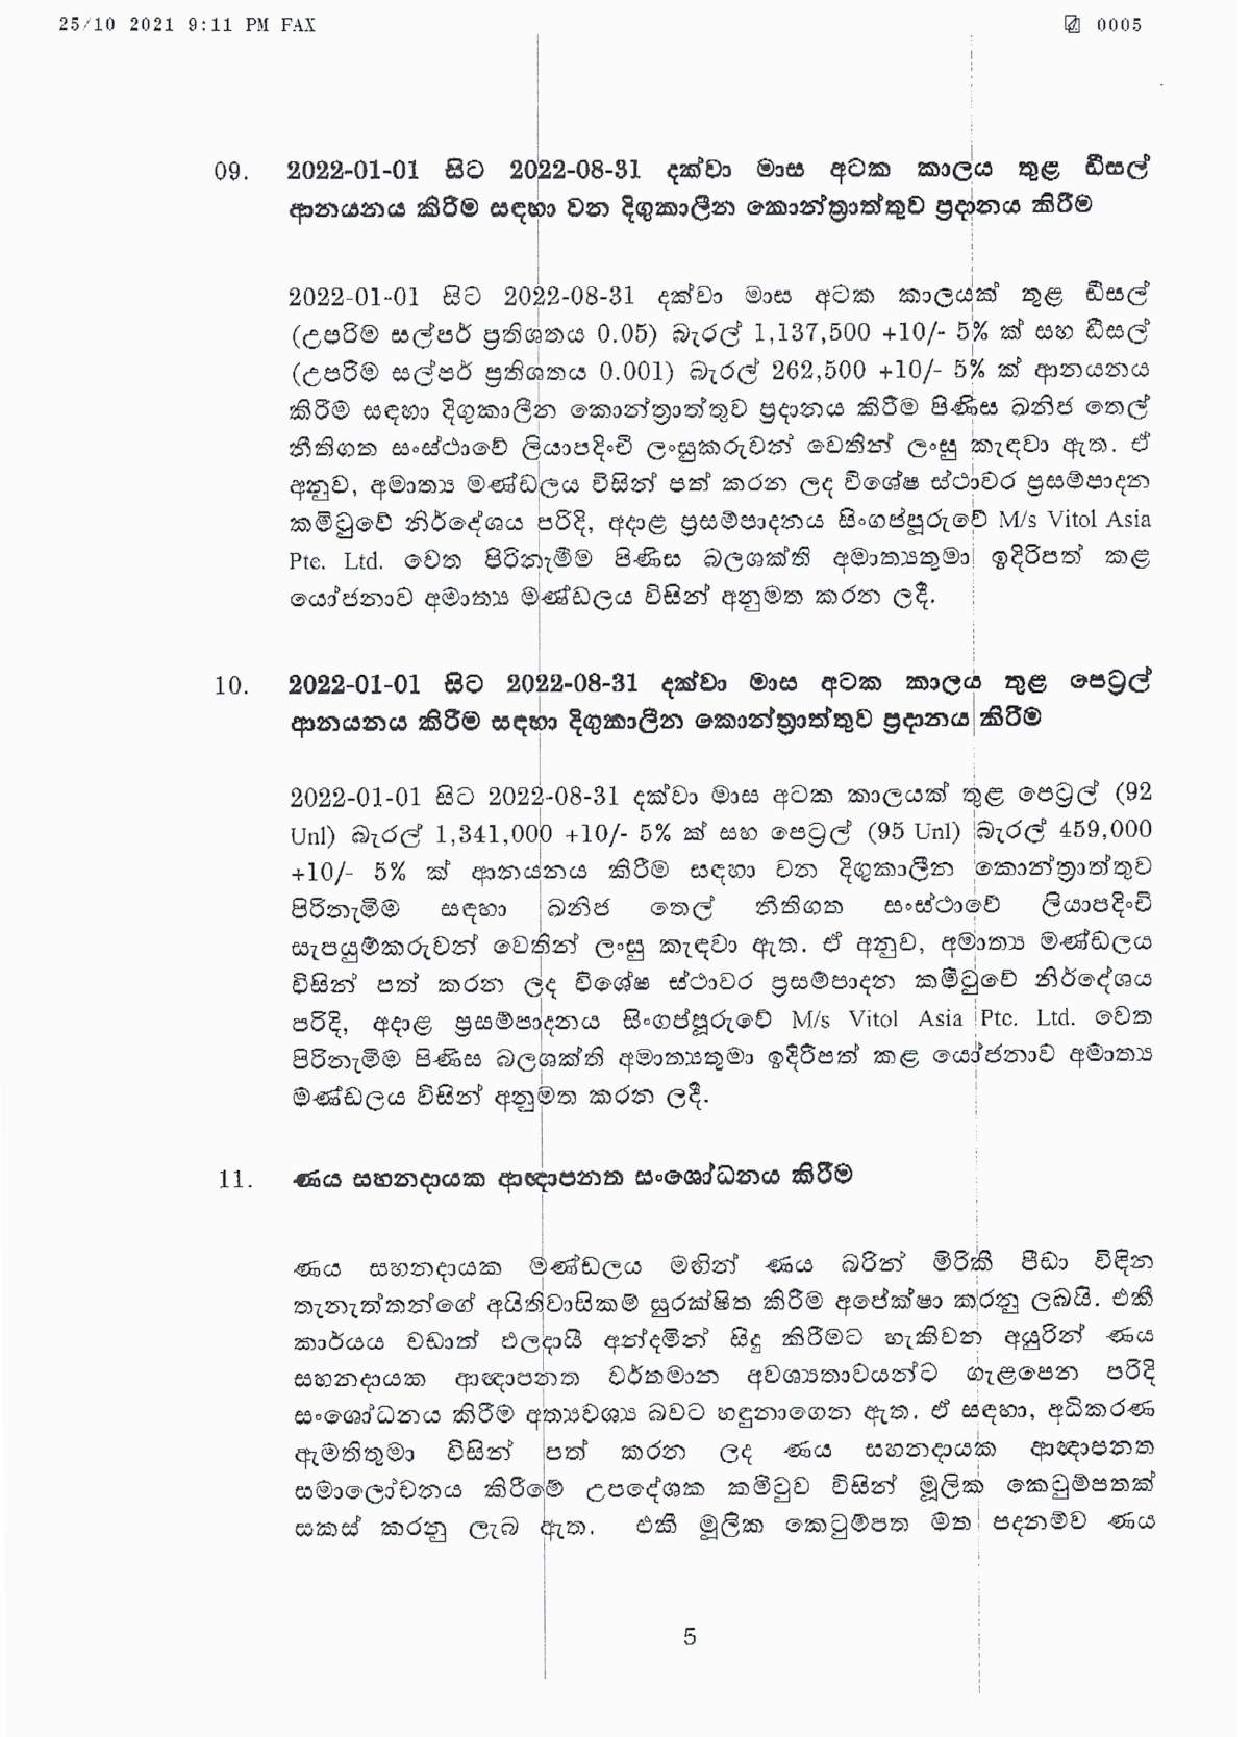 Cabinet Decisions on 25.10.2021 page 005